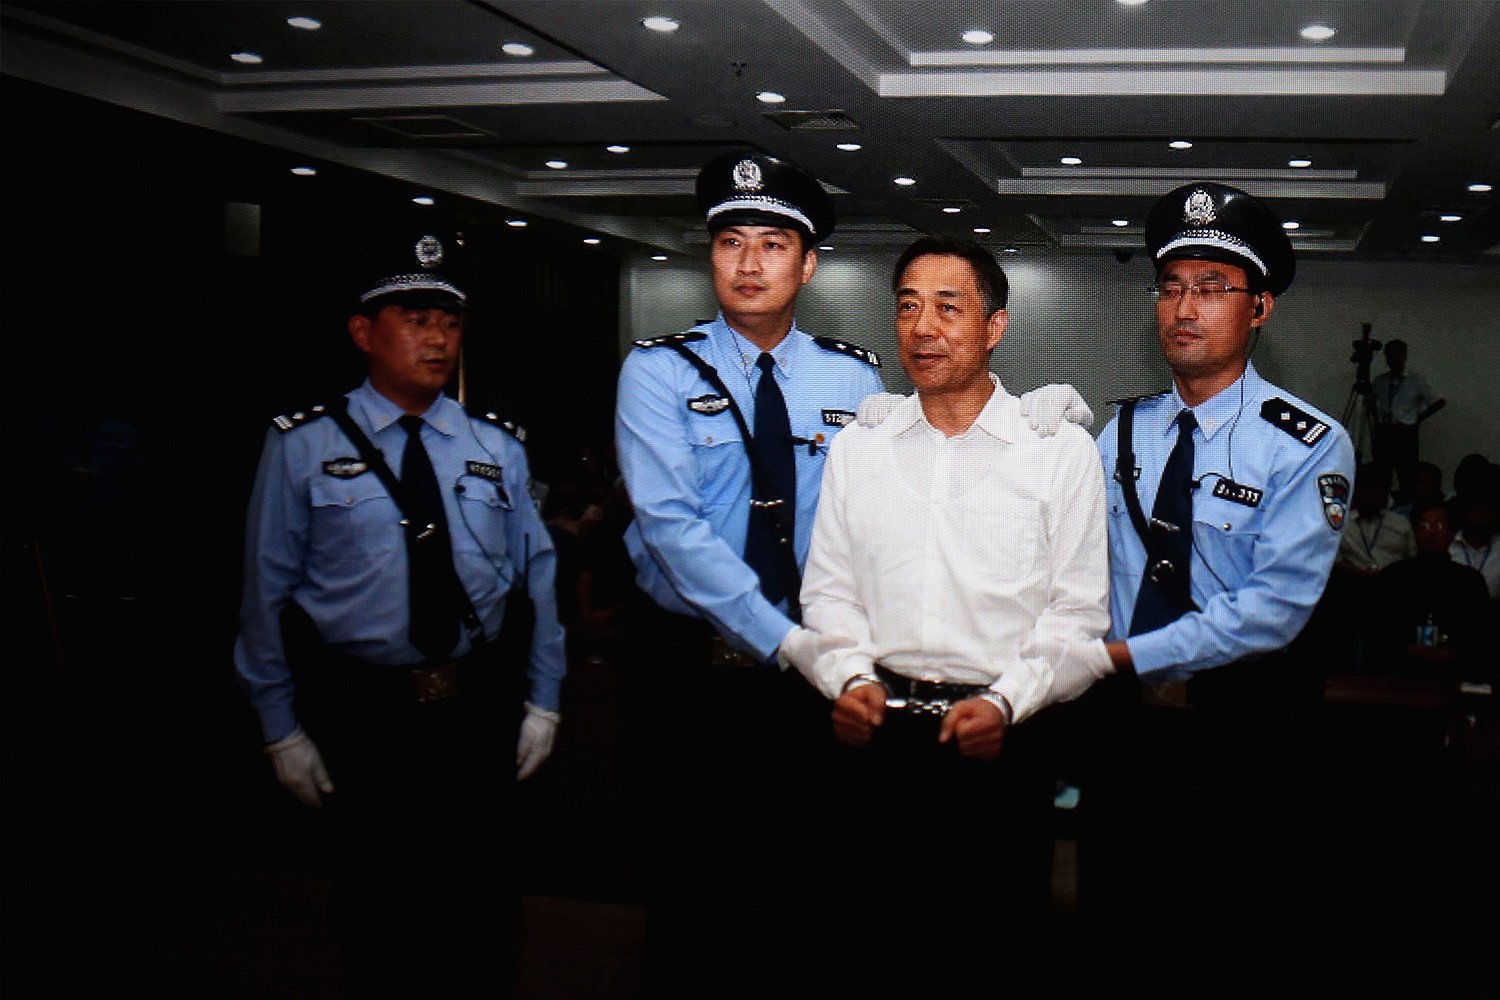 A screen shows the sentencing of Bo Xilai in Beijing on Sept. 2, 2013. The former Chinese politician was sentenced to life imprisonment for bribery, embezzlement, and abuse of power.